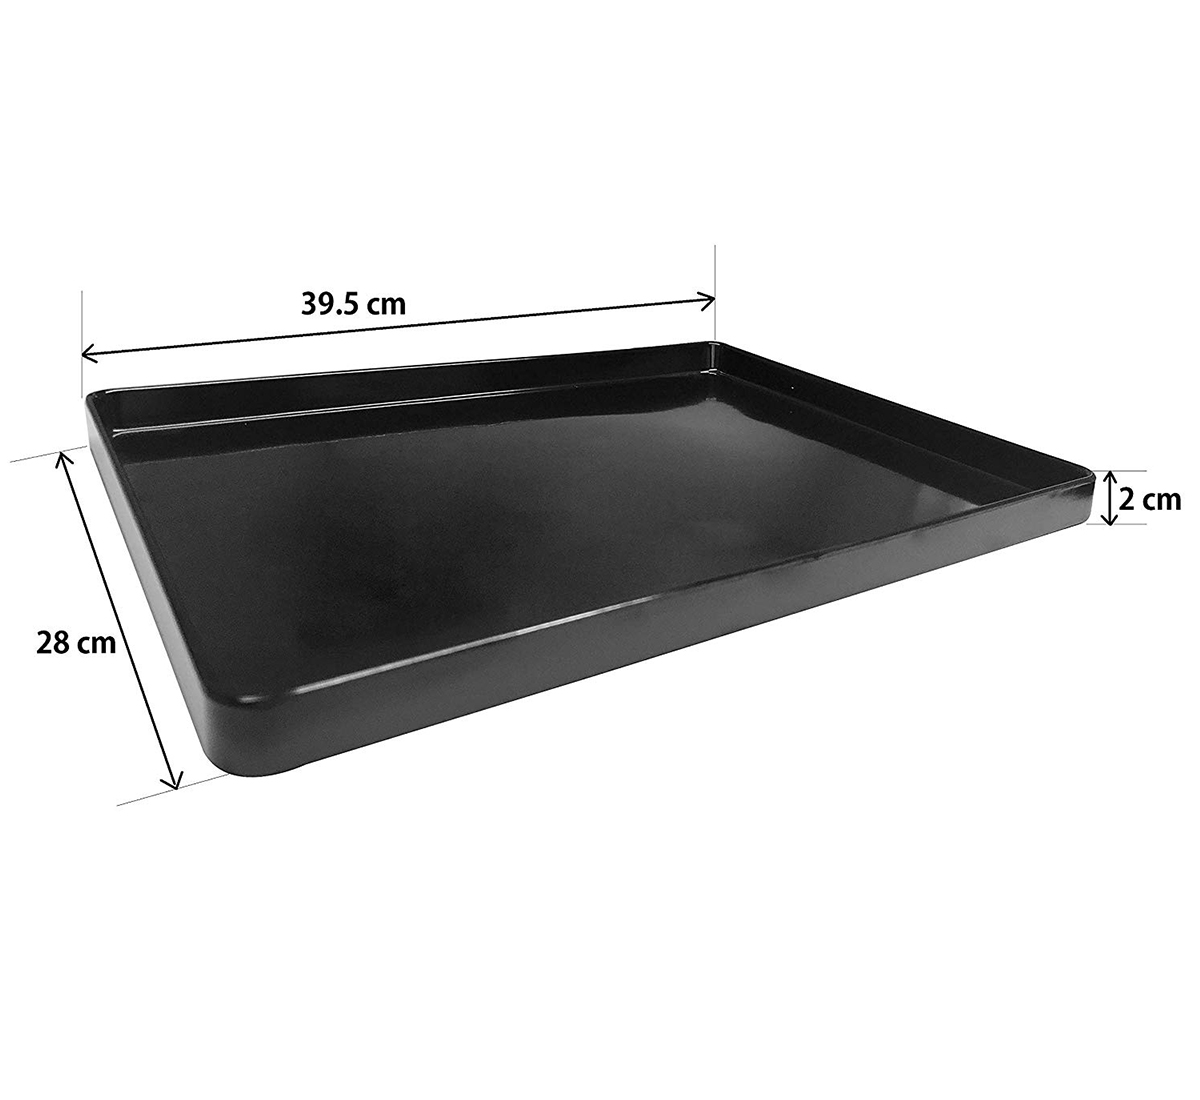 Black high quality electric kettle tray